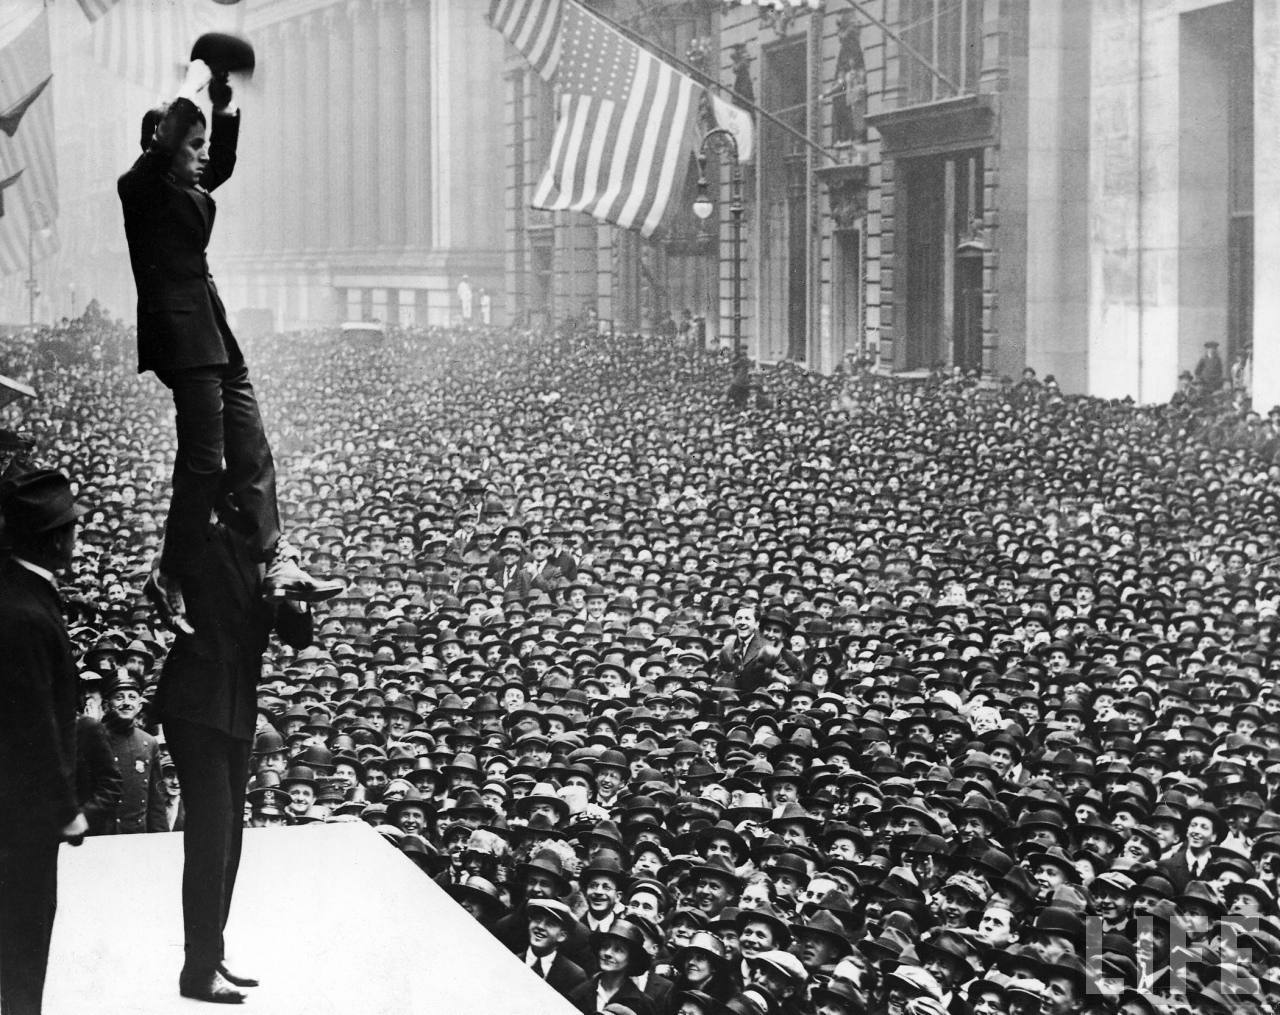 Charlie Chaplin in front of New York crowd, 1918